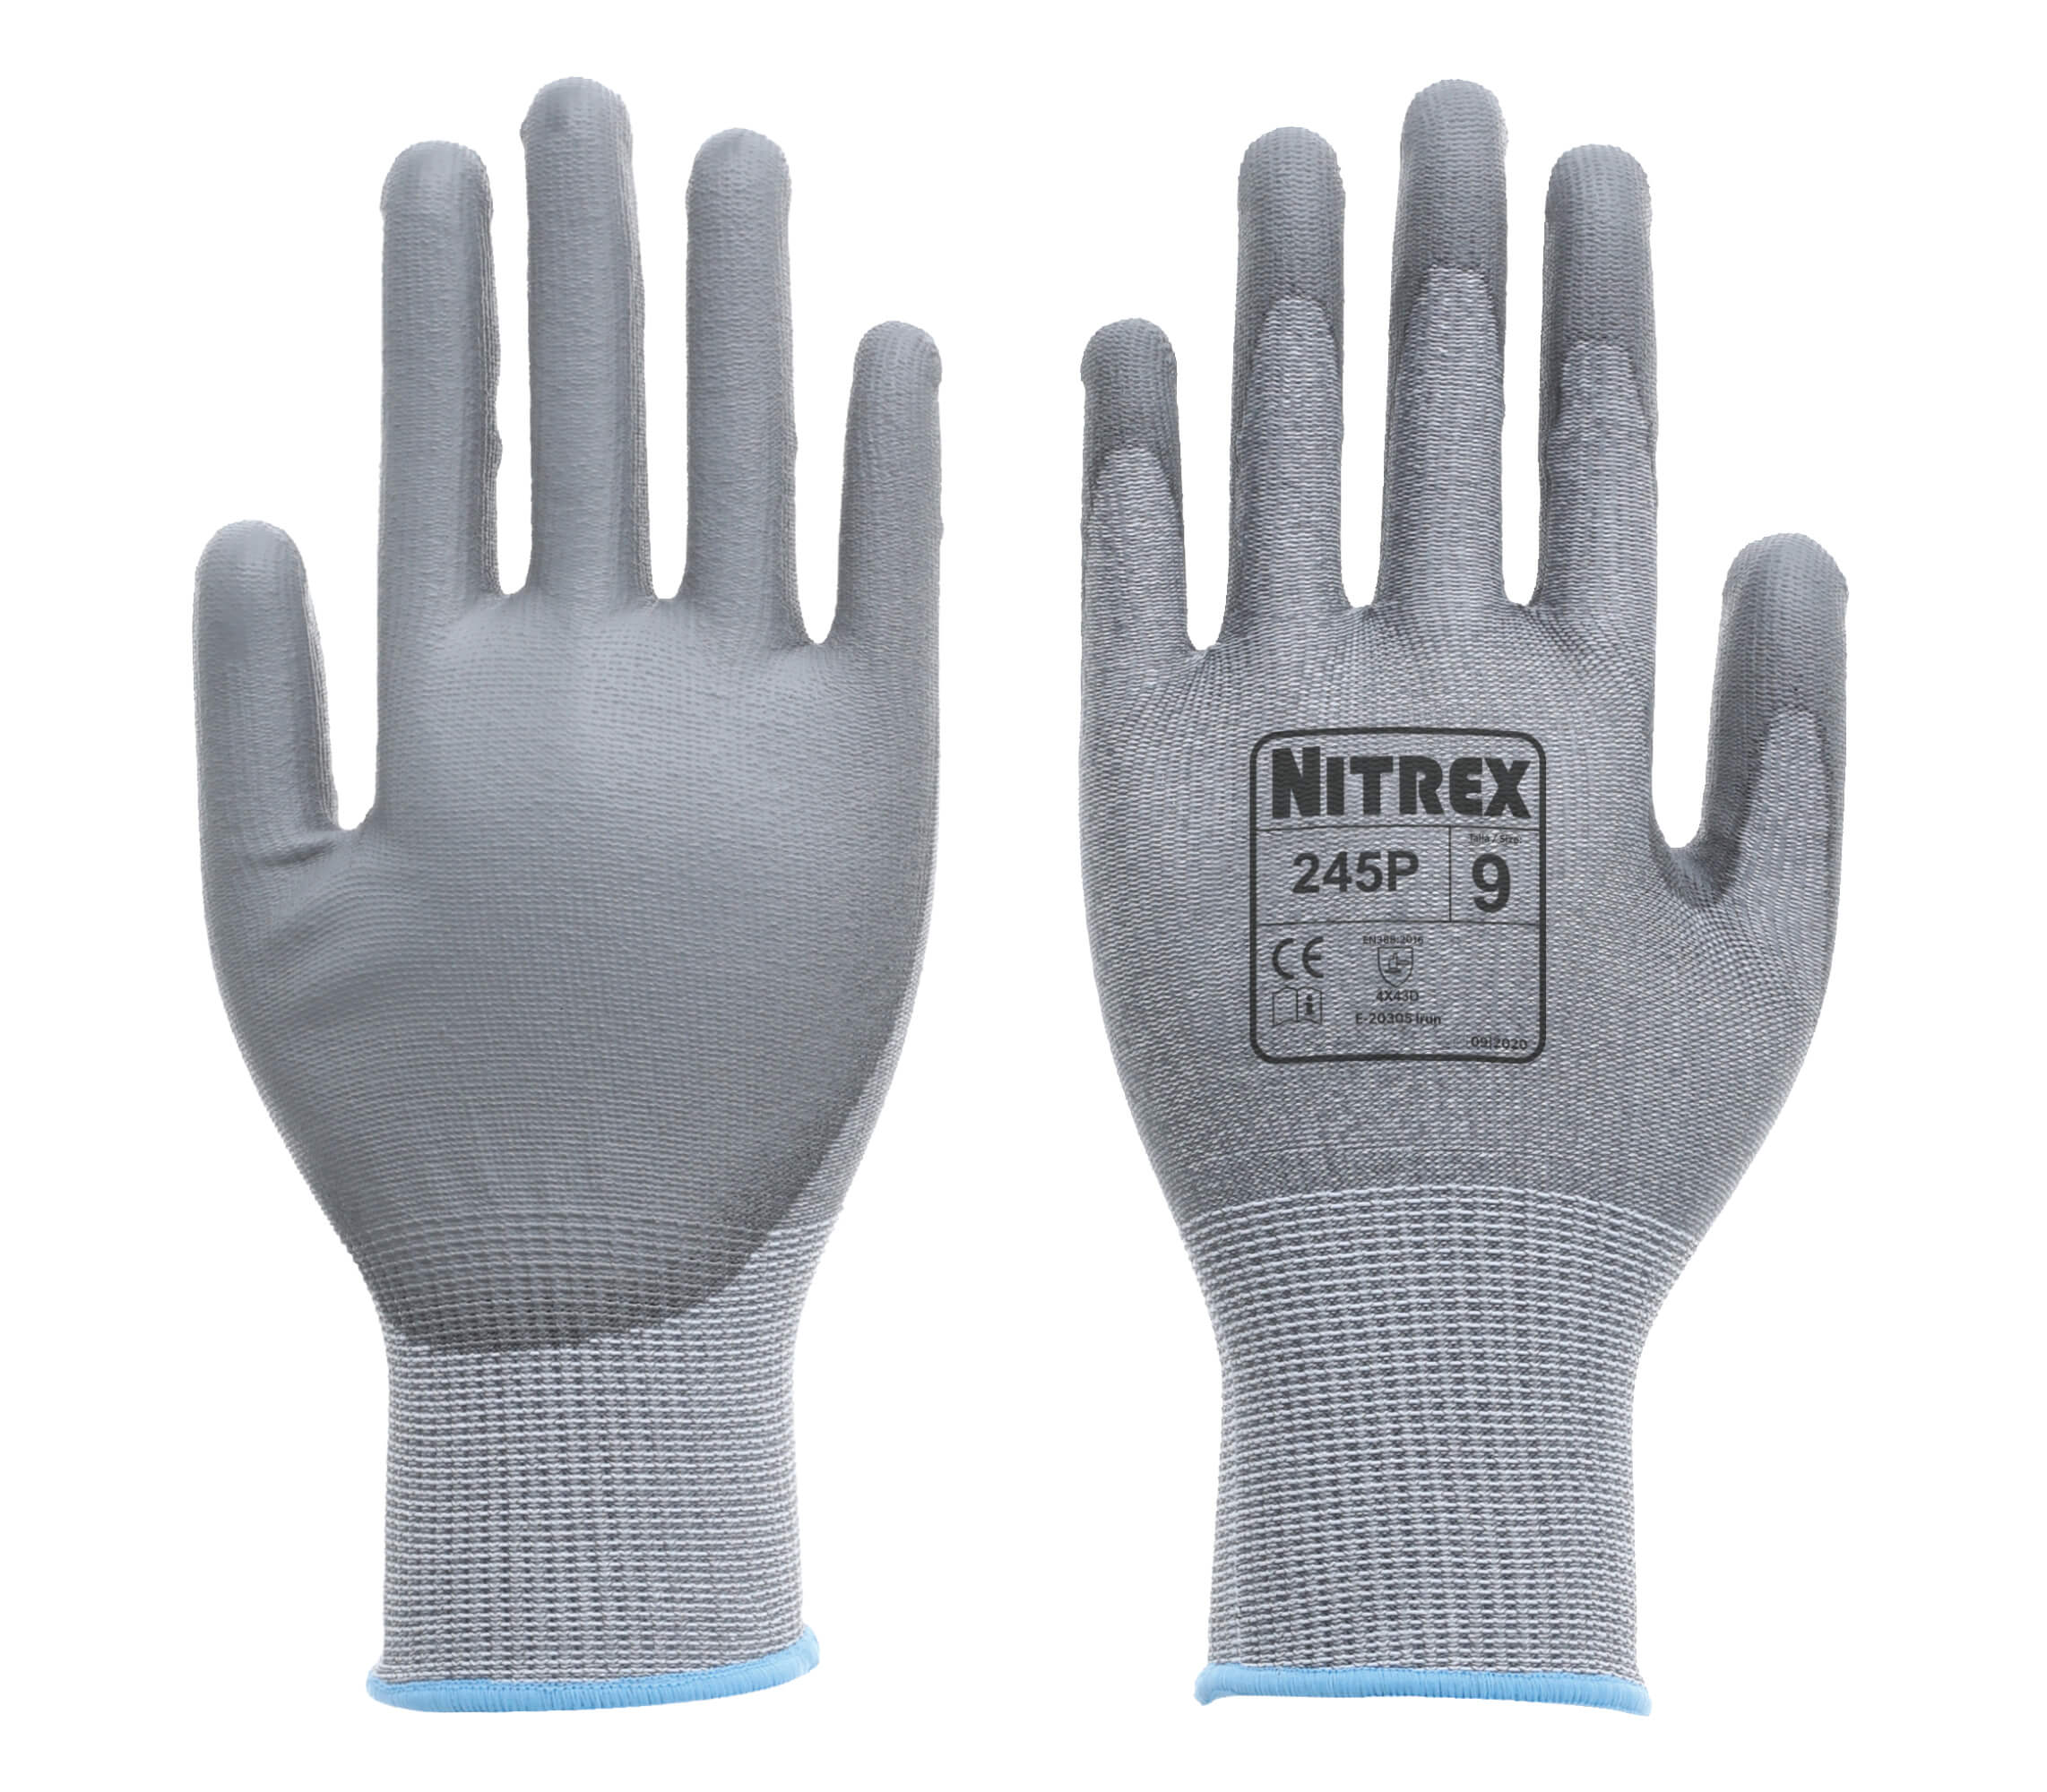 Nitrex 245P - PU Palm Coated Safety Gloves - Level D Cut Protection - Size 7/Small